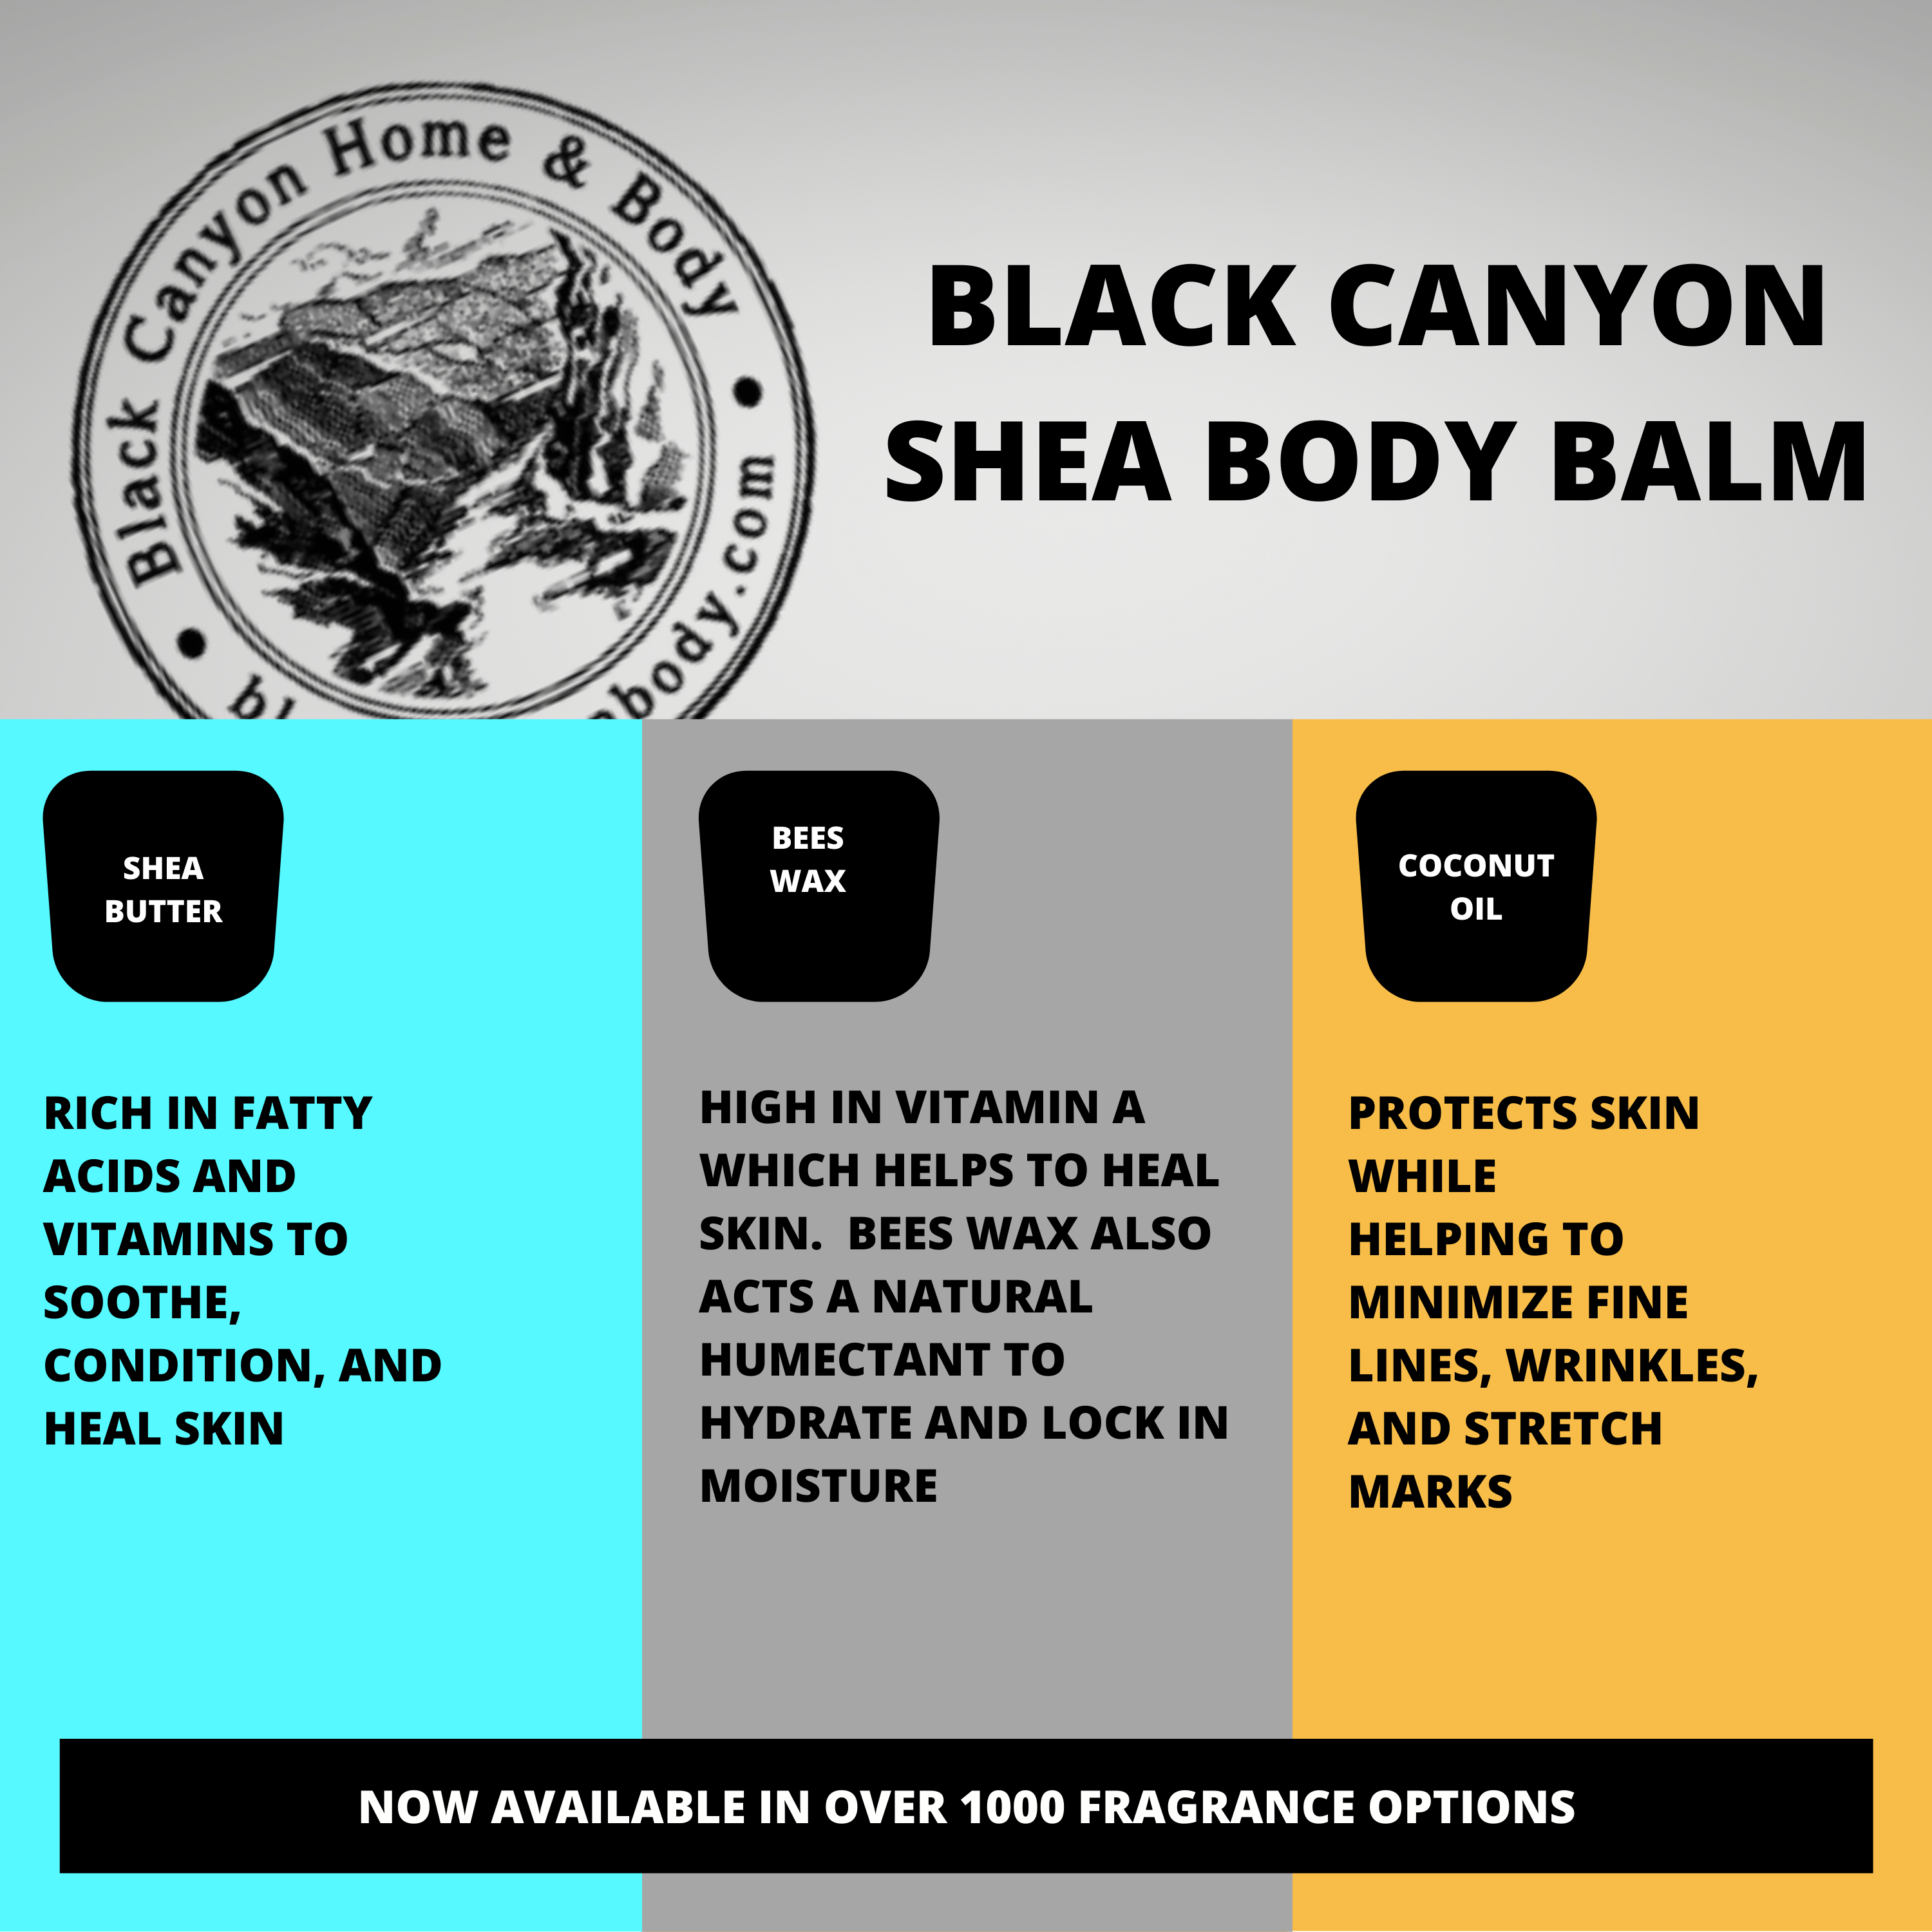 Black Canyon BBQ Sauce Scented Natural Body Balm with Shea